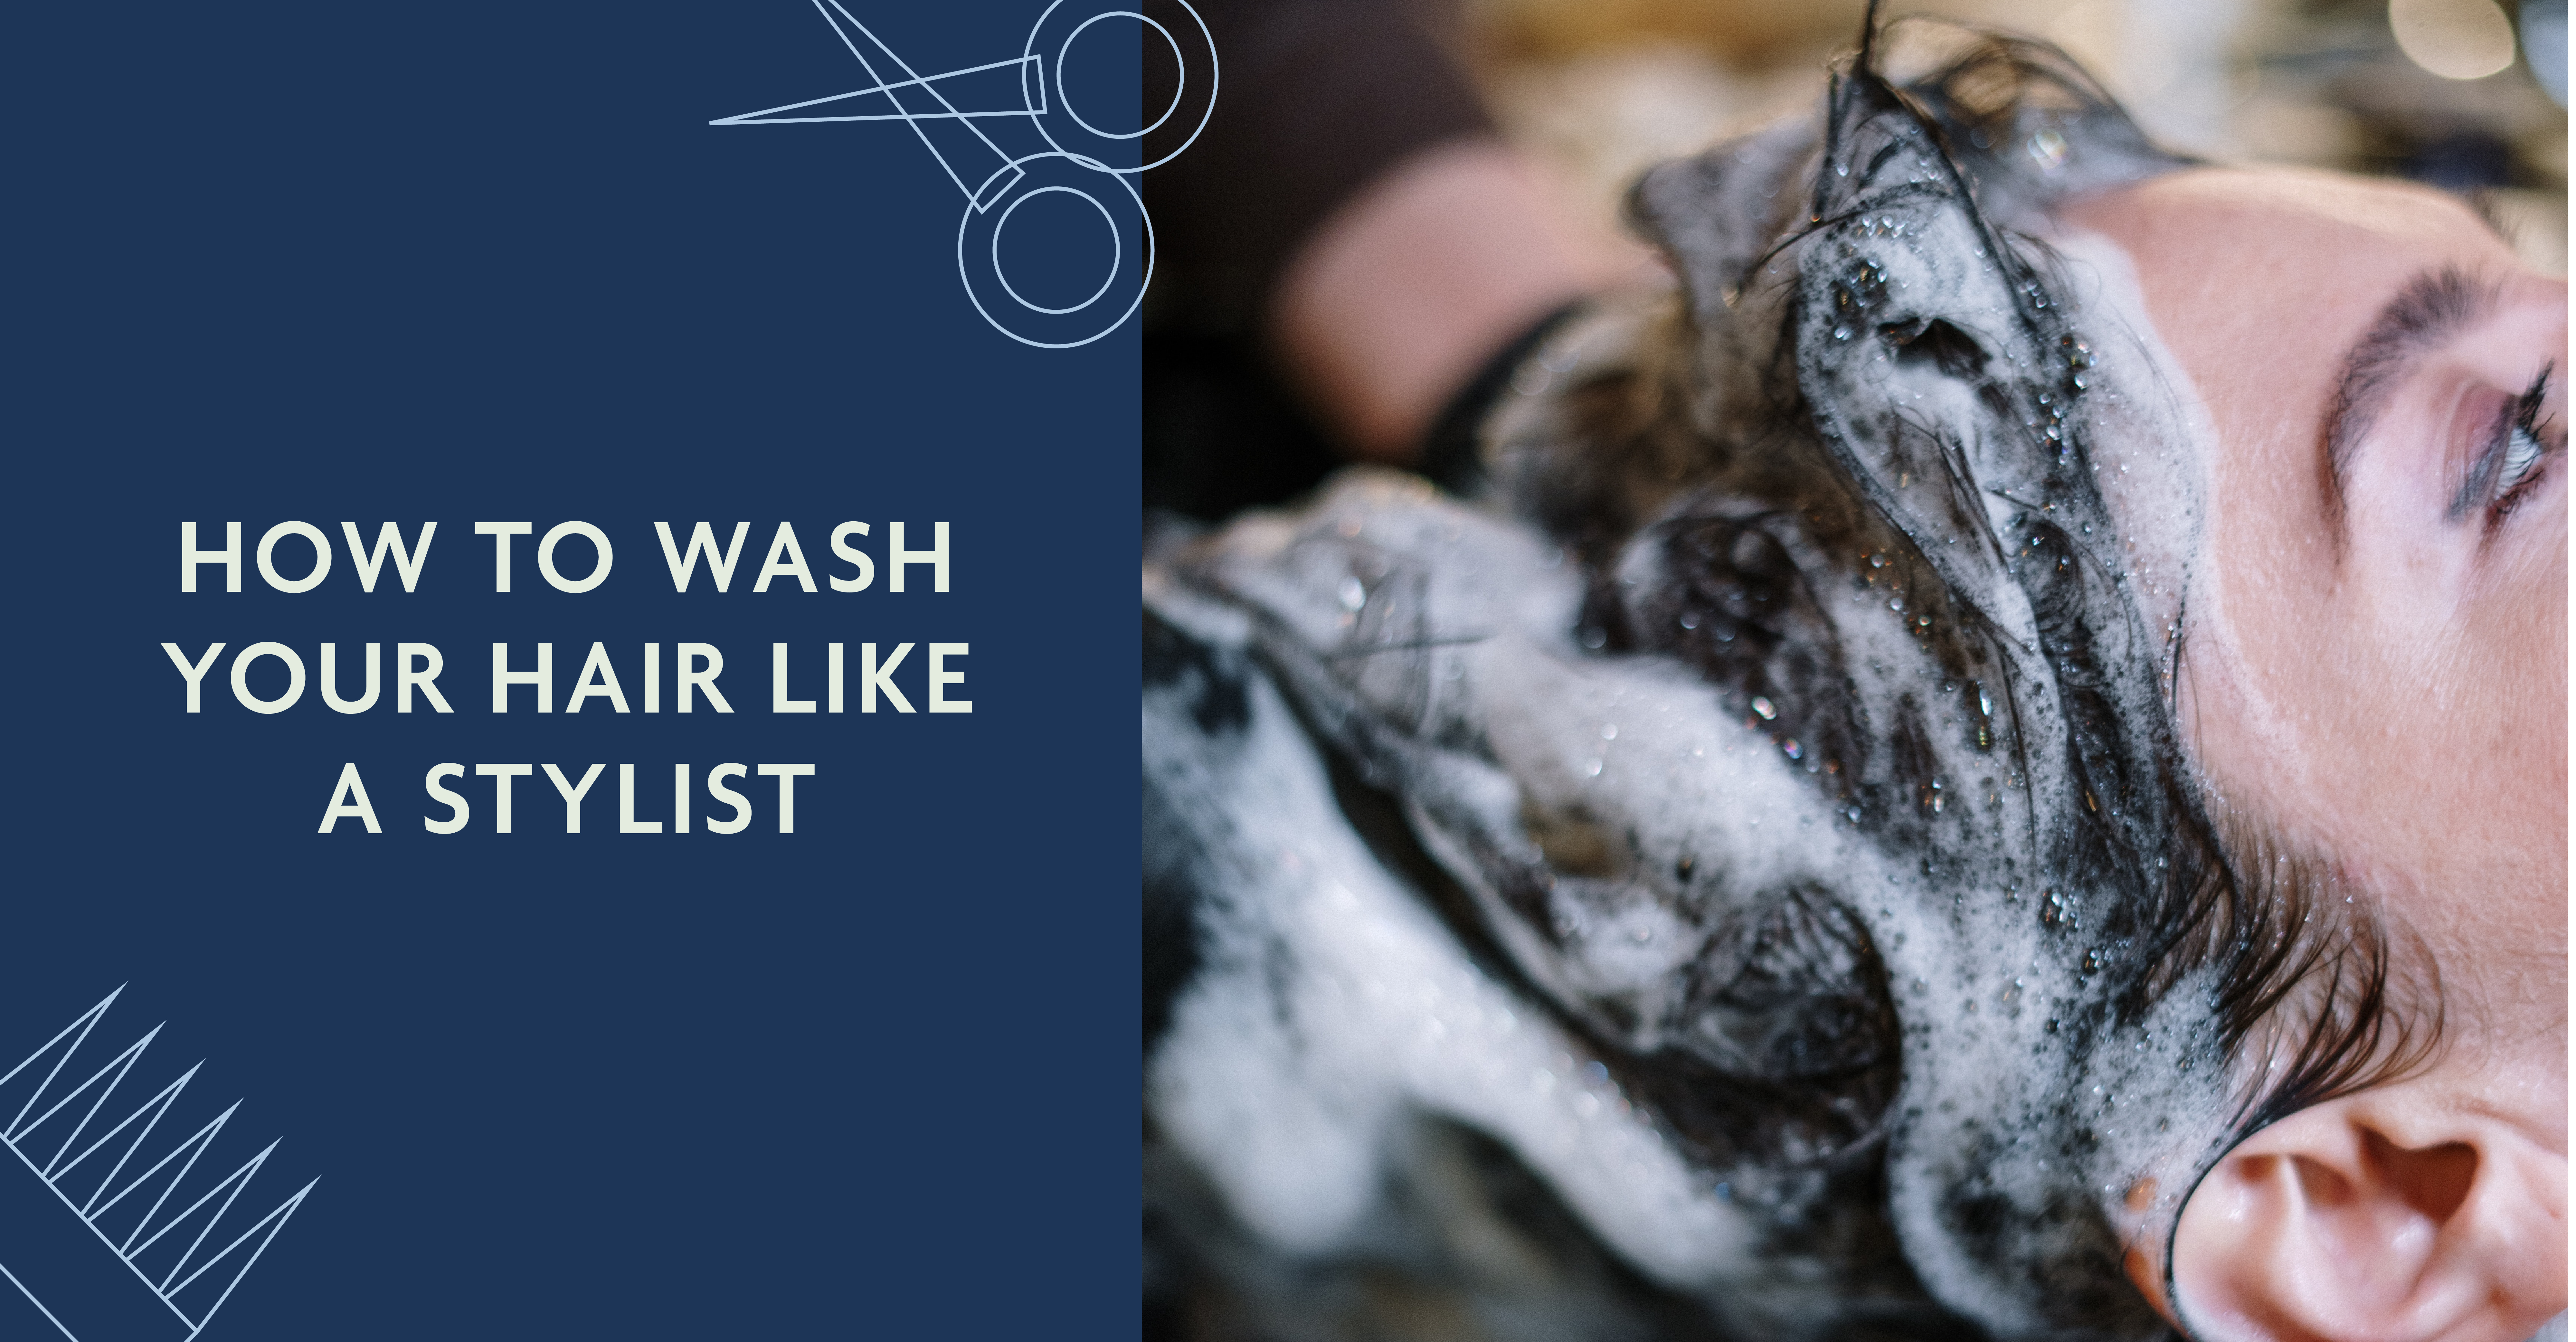 How to Wash Your Hair like a Stylist